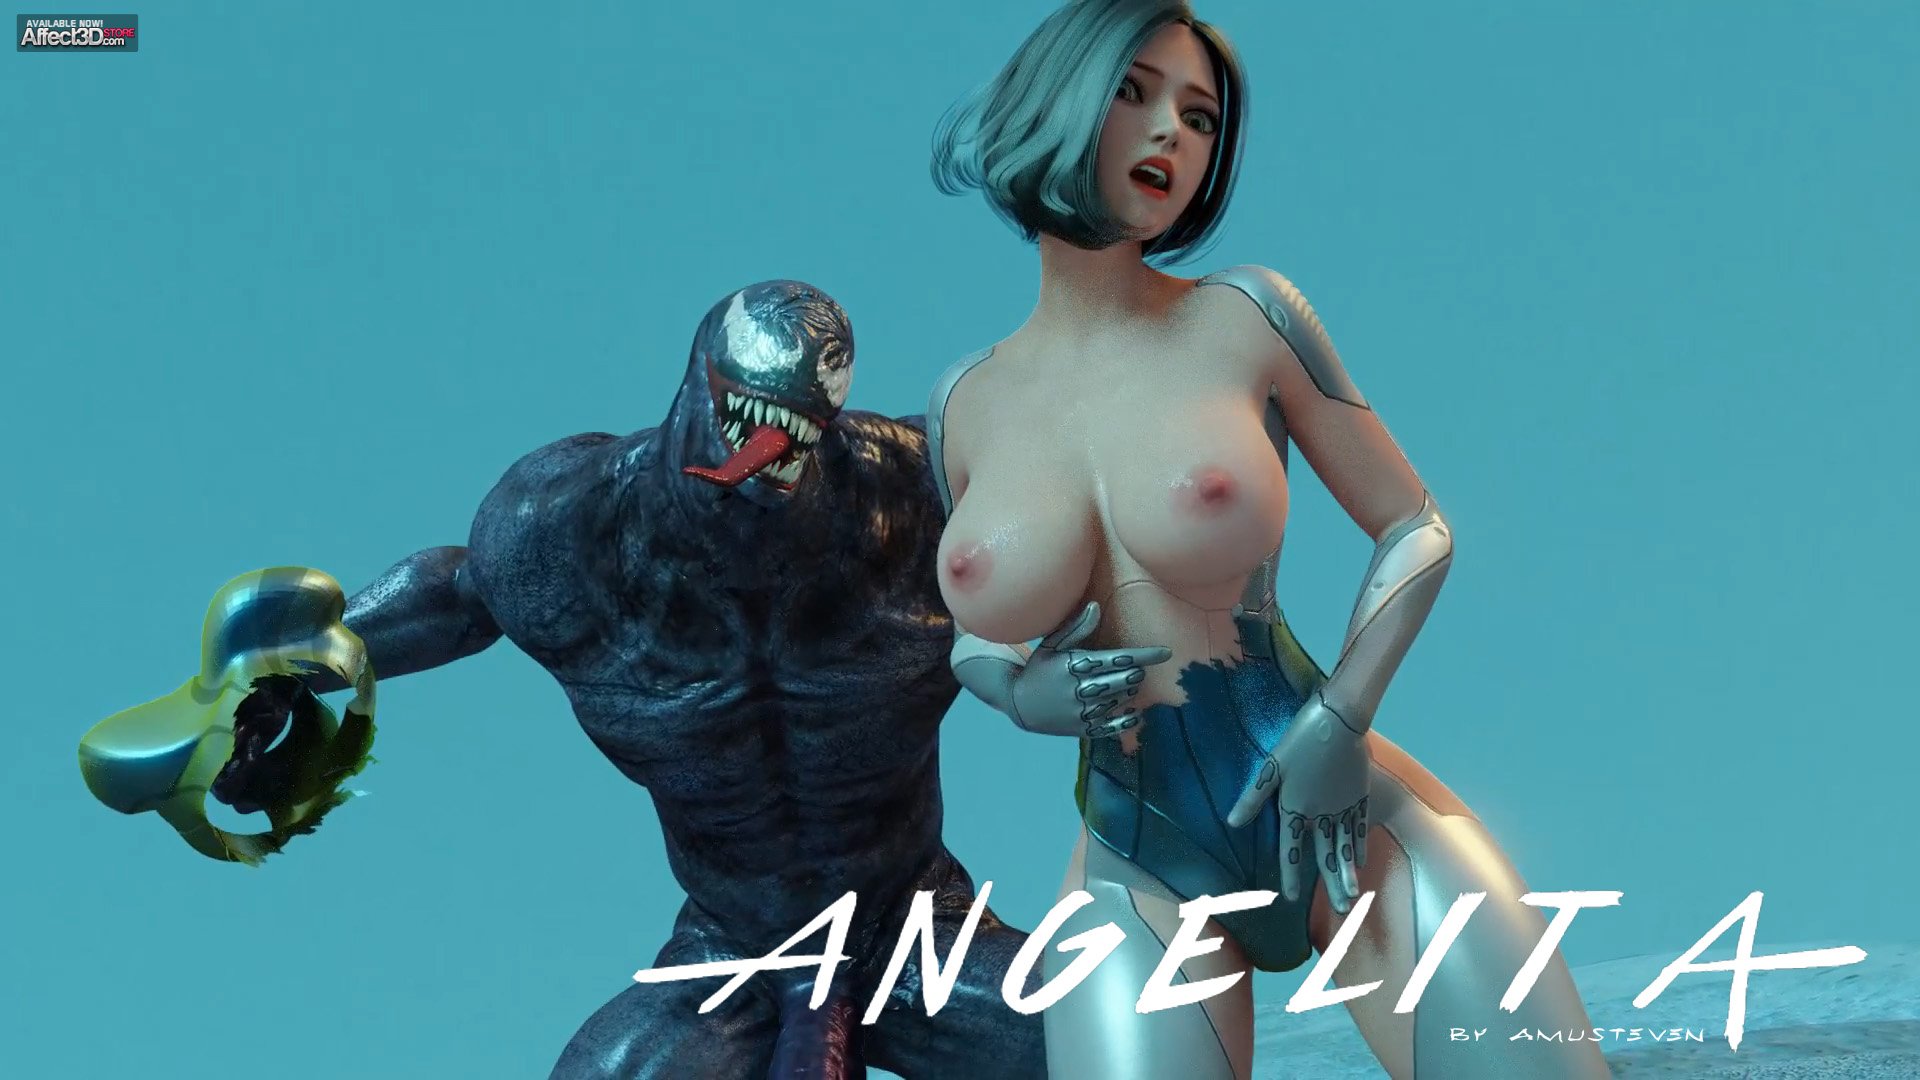 1920px x 1080px - Big Tits Angelita fucked hard by a monster in a 3d animation